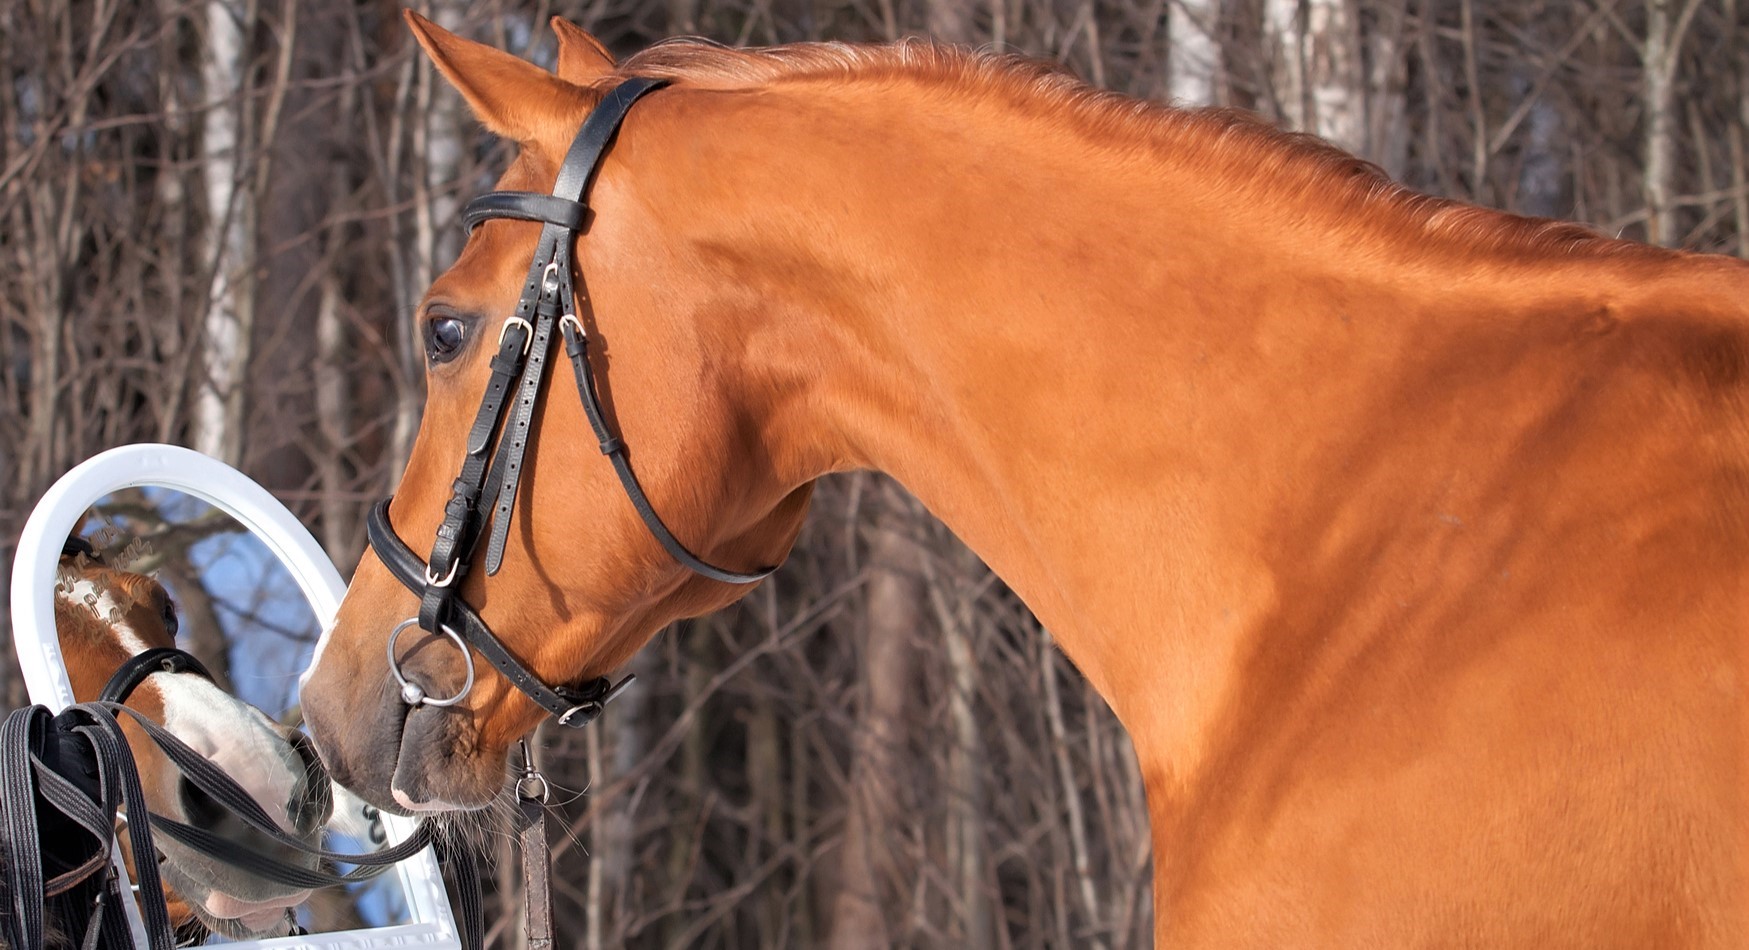 How smart are horses? Horse intelligence facts, research, comparison, and studies